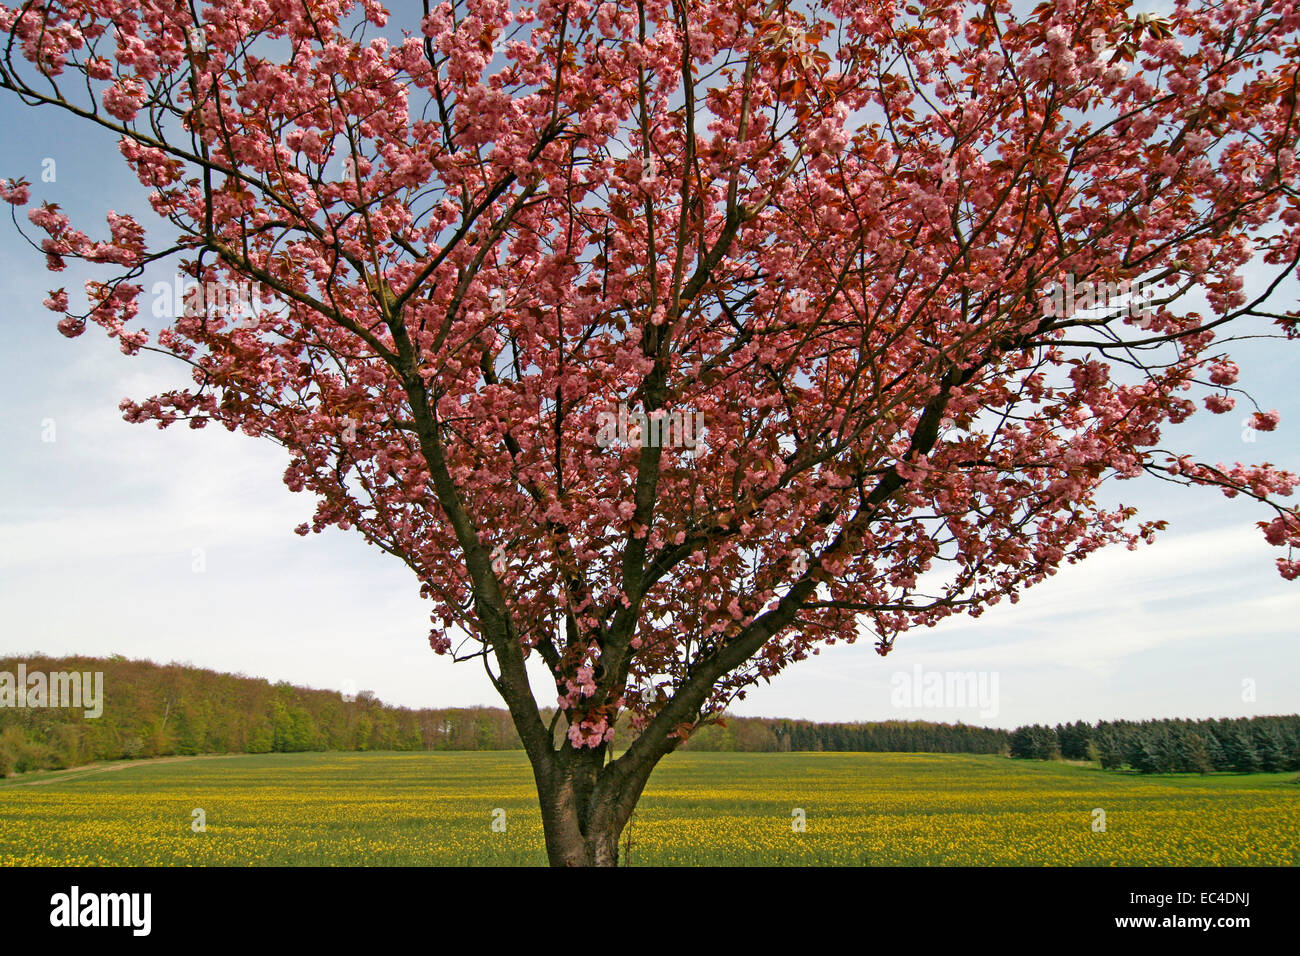 Cherry tree in April in Bad Rothenfelde, Osnabruecker country, Lower Saxony, Germany Stock Photo